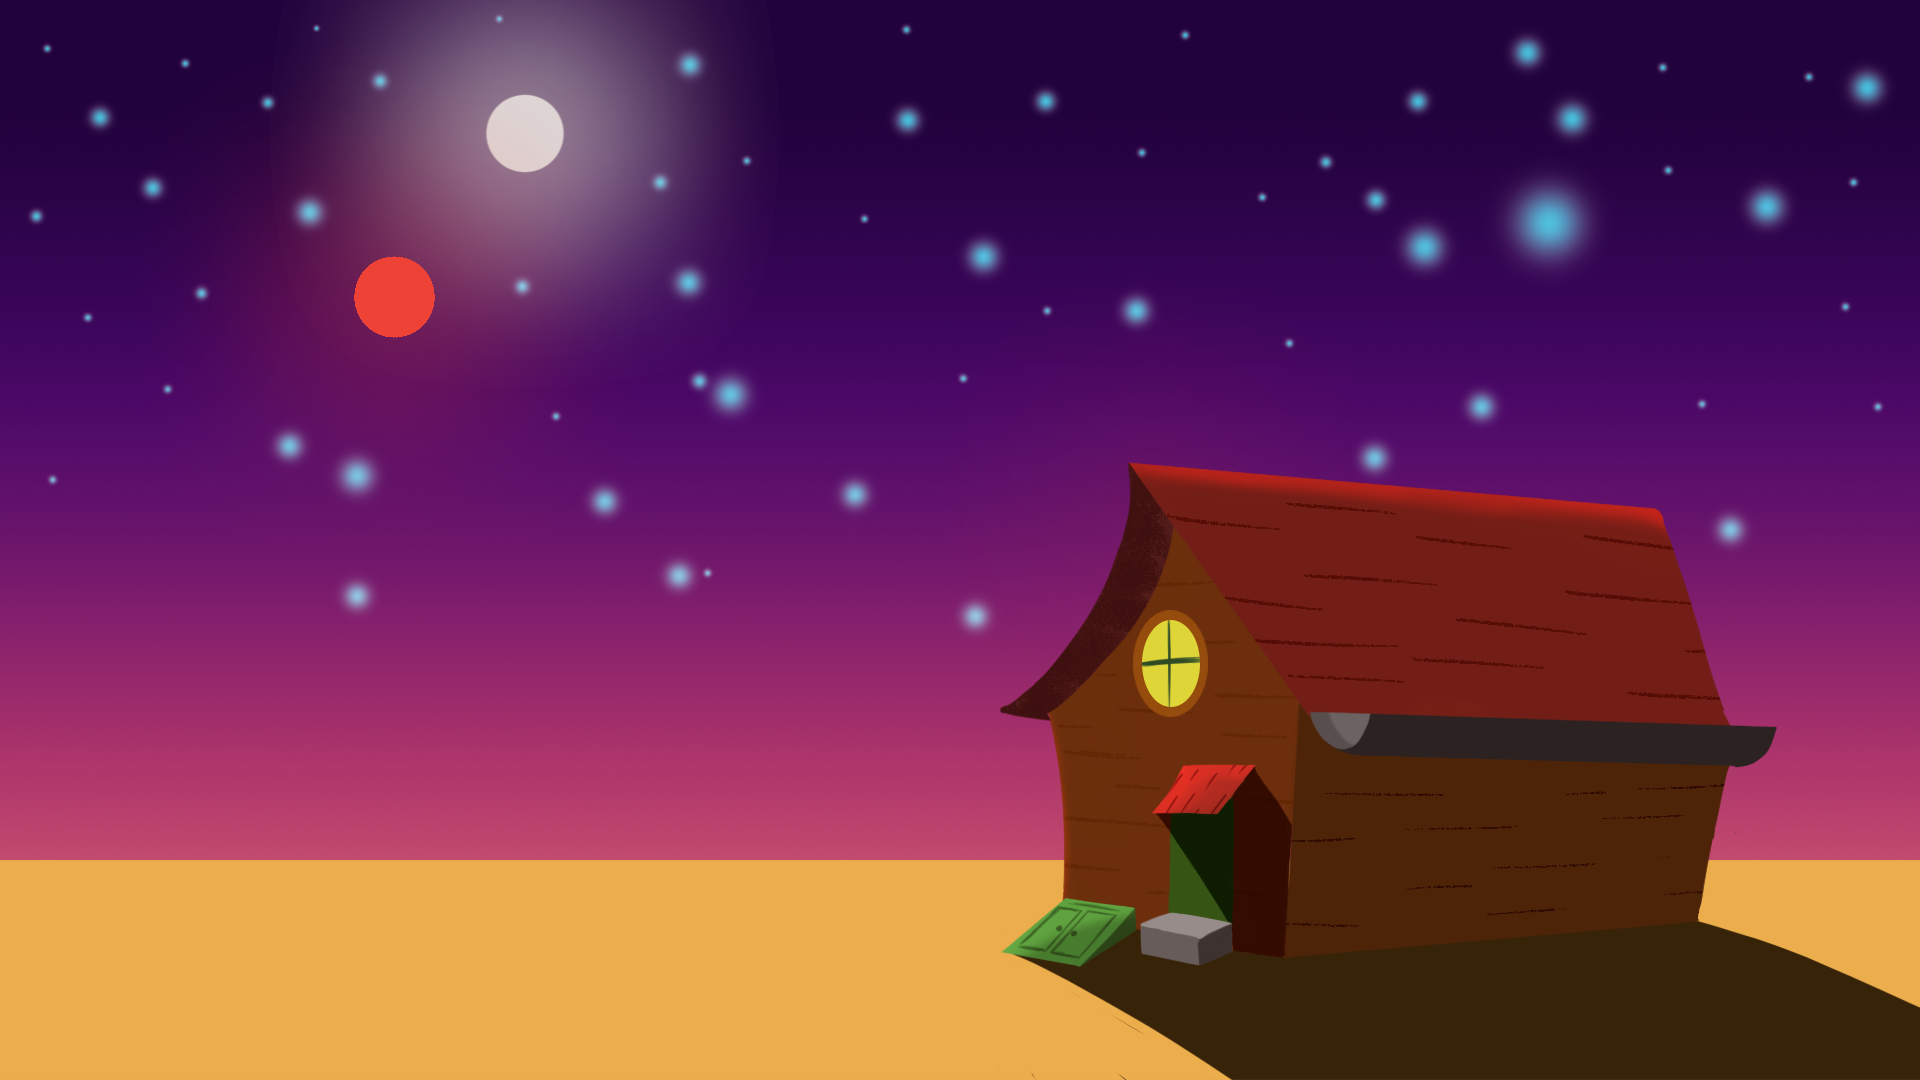 General 1920x1080 Courage the Cowardly Dog landscape house cartoon